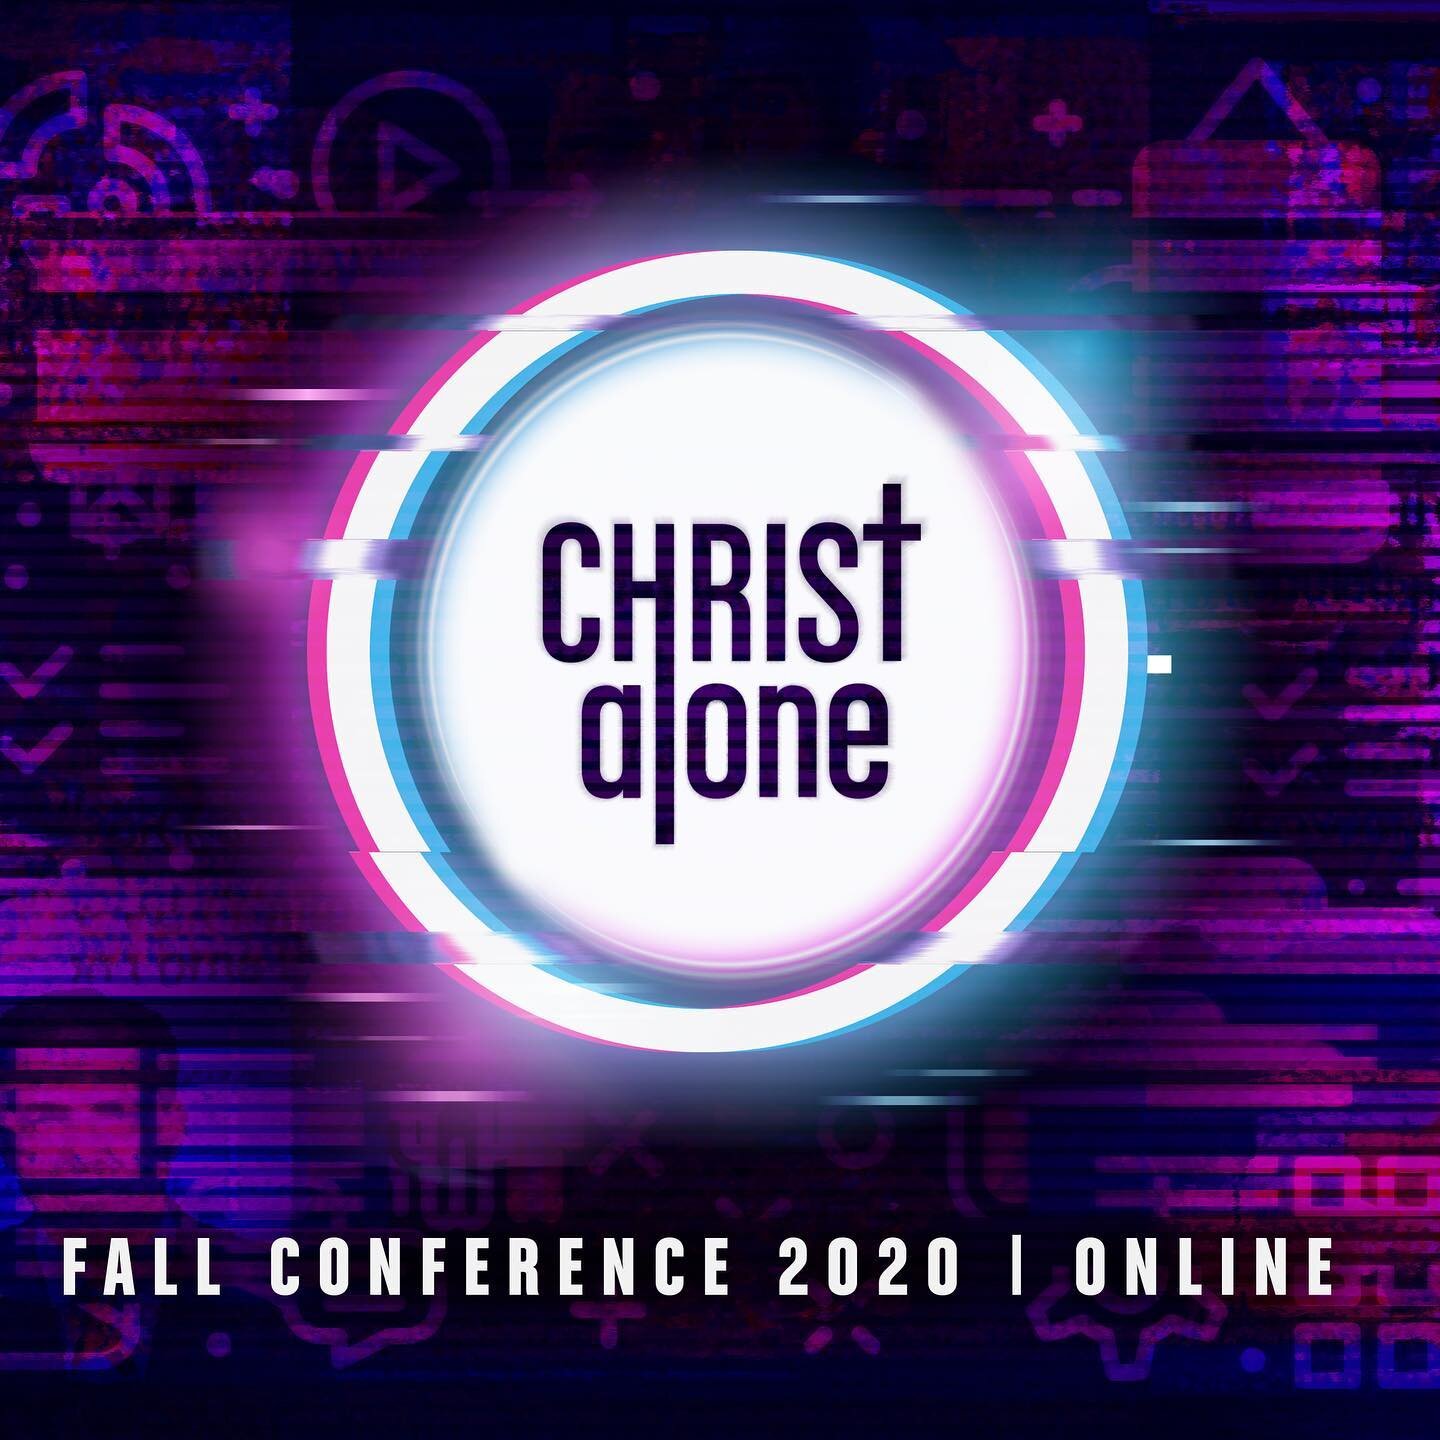 Have you signed up for Fall Conference yet?  Next weekend students from all over the globe will join together for an incredible 24 hours of encouragement, growth, and learning about how to know and follow an even more incredible God!  And it&rsquo;s 